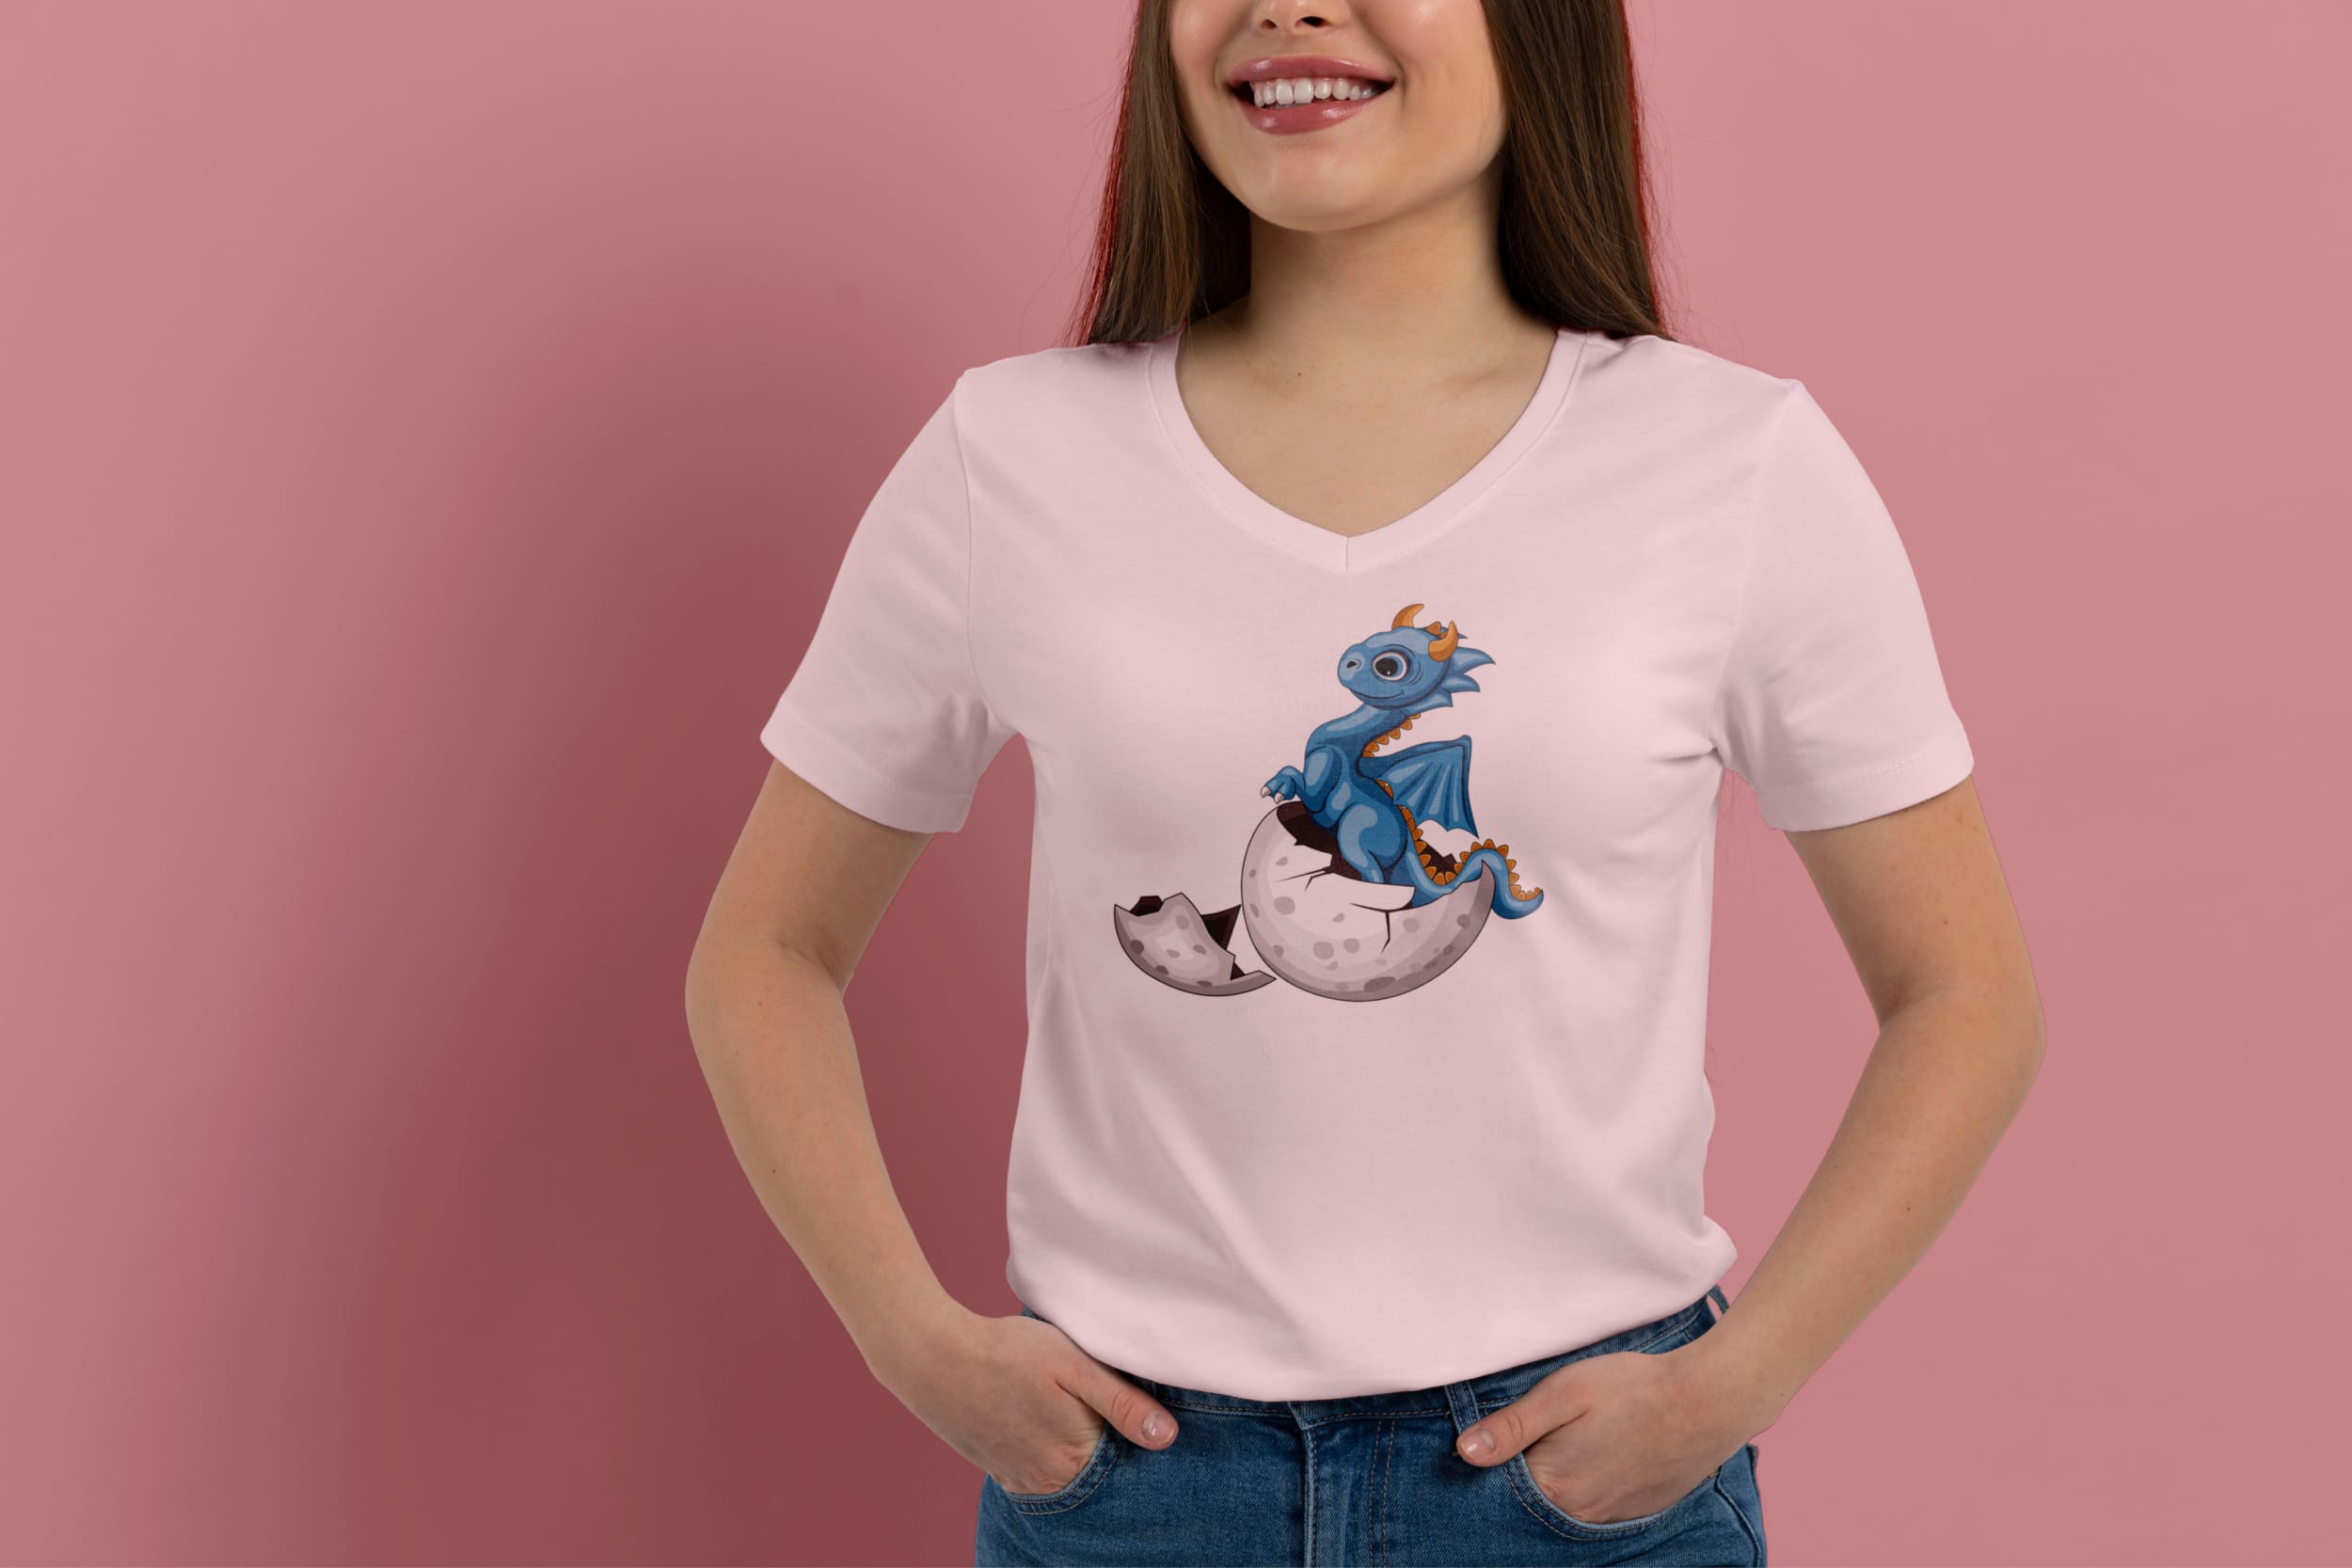 A light pink t-shirt on a girl with a light blue dragon hatched from an egg, on a pink background.